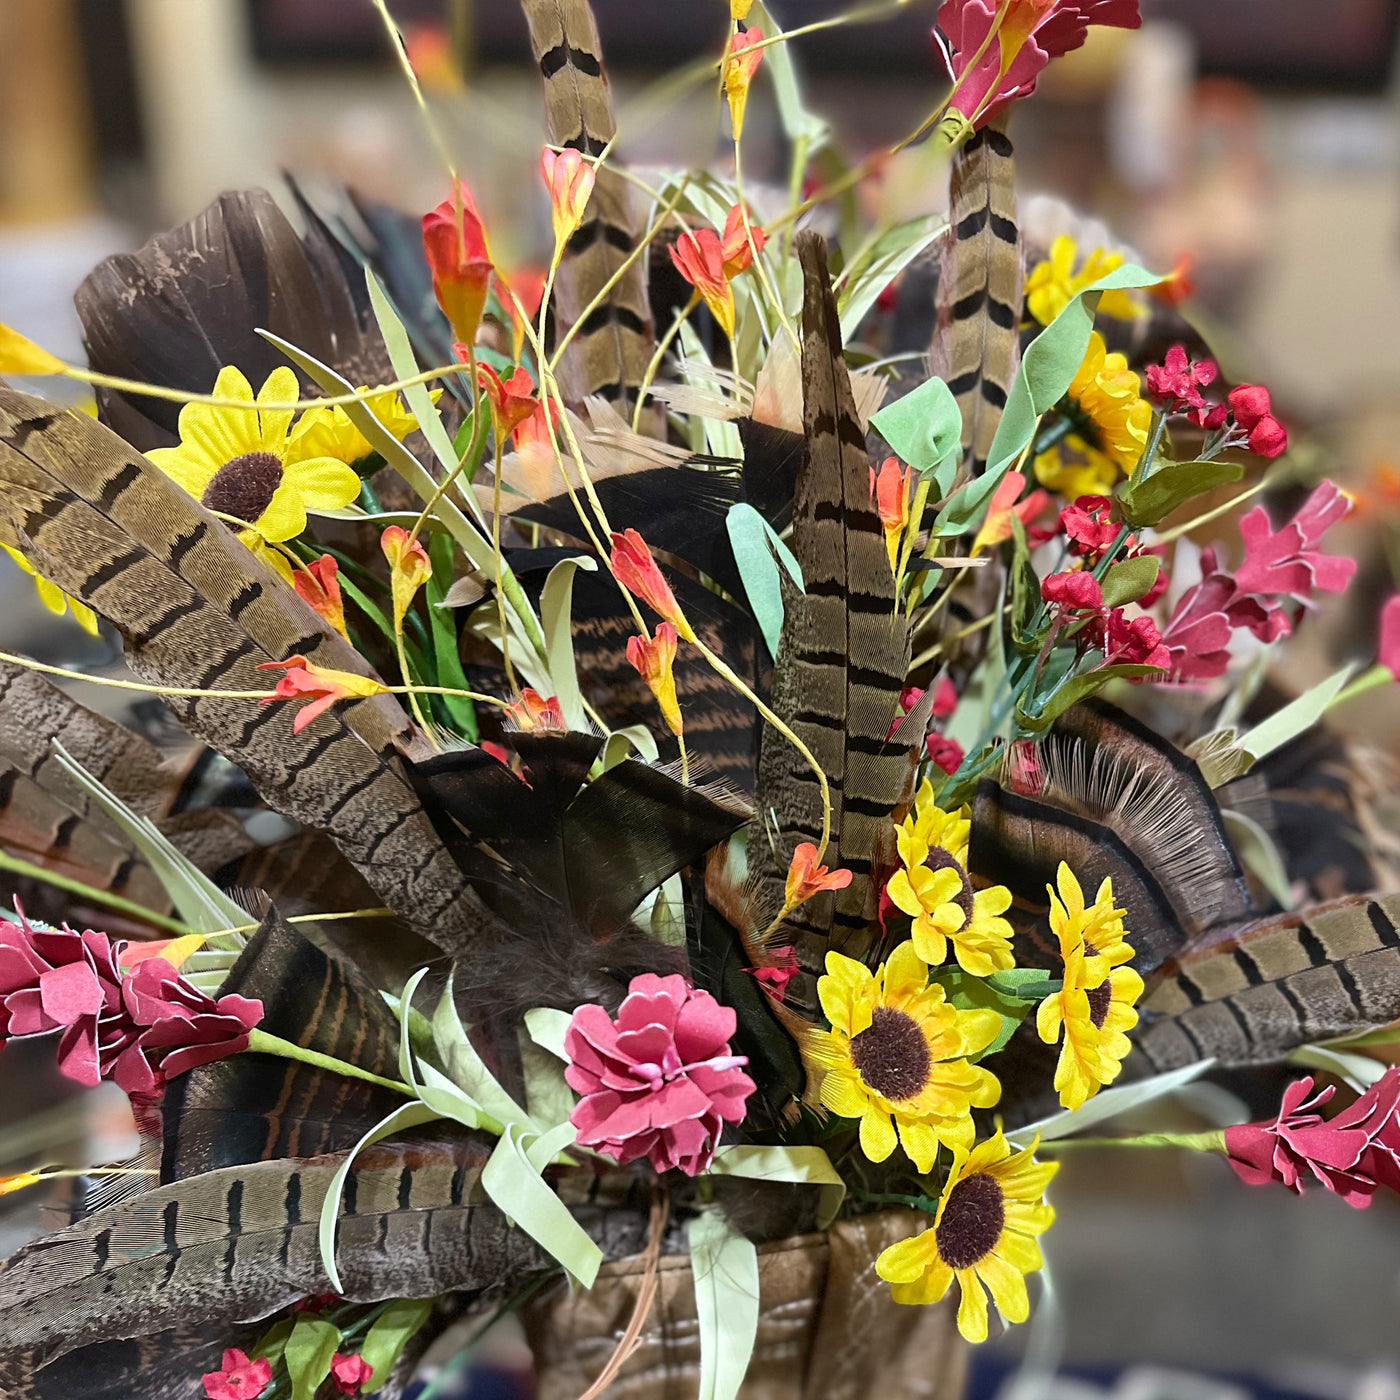 Western Boot Still Life Arrangement with Sunflowers by Silvers